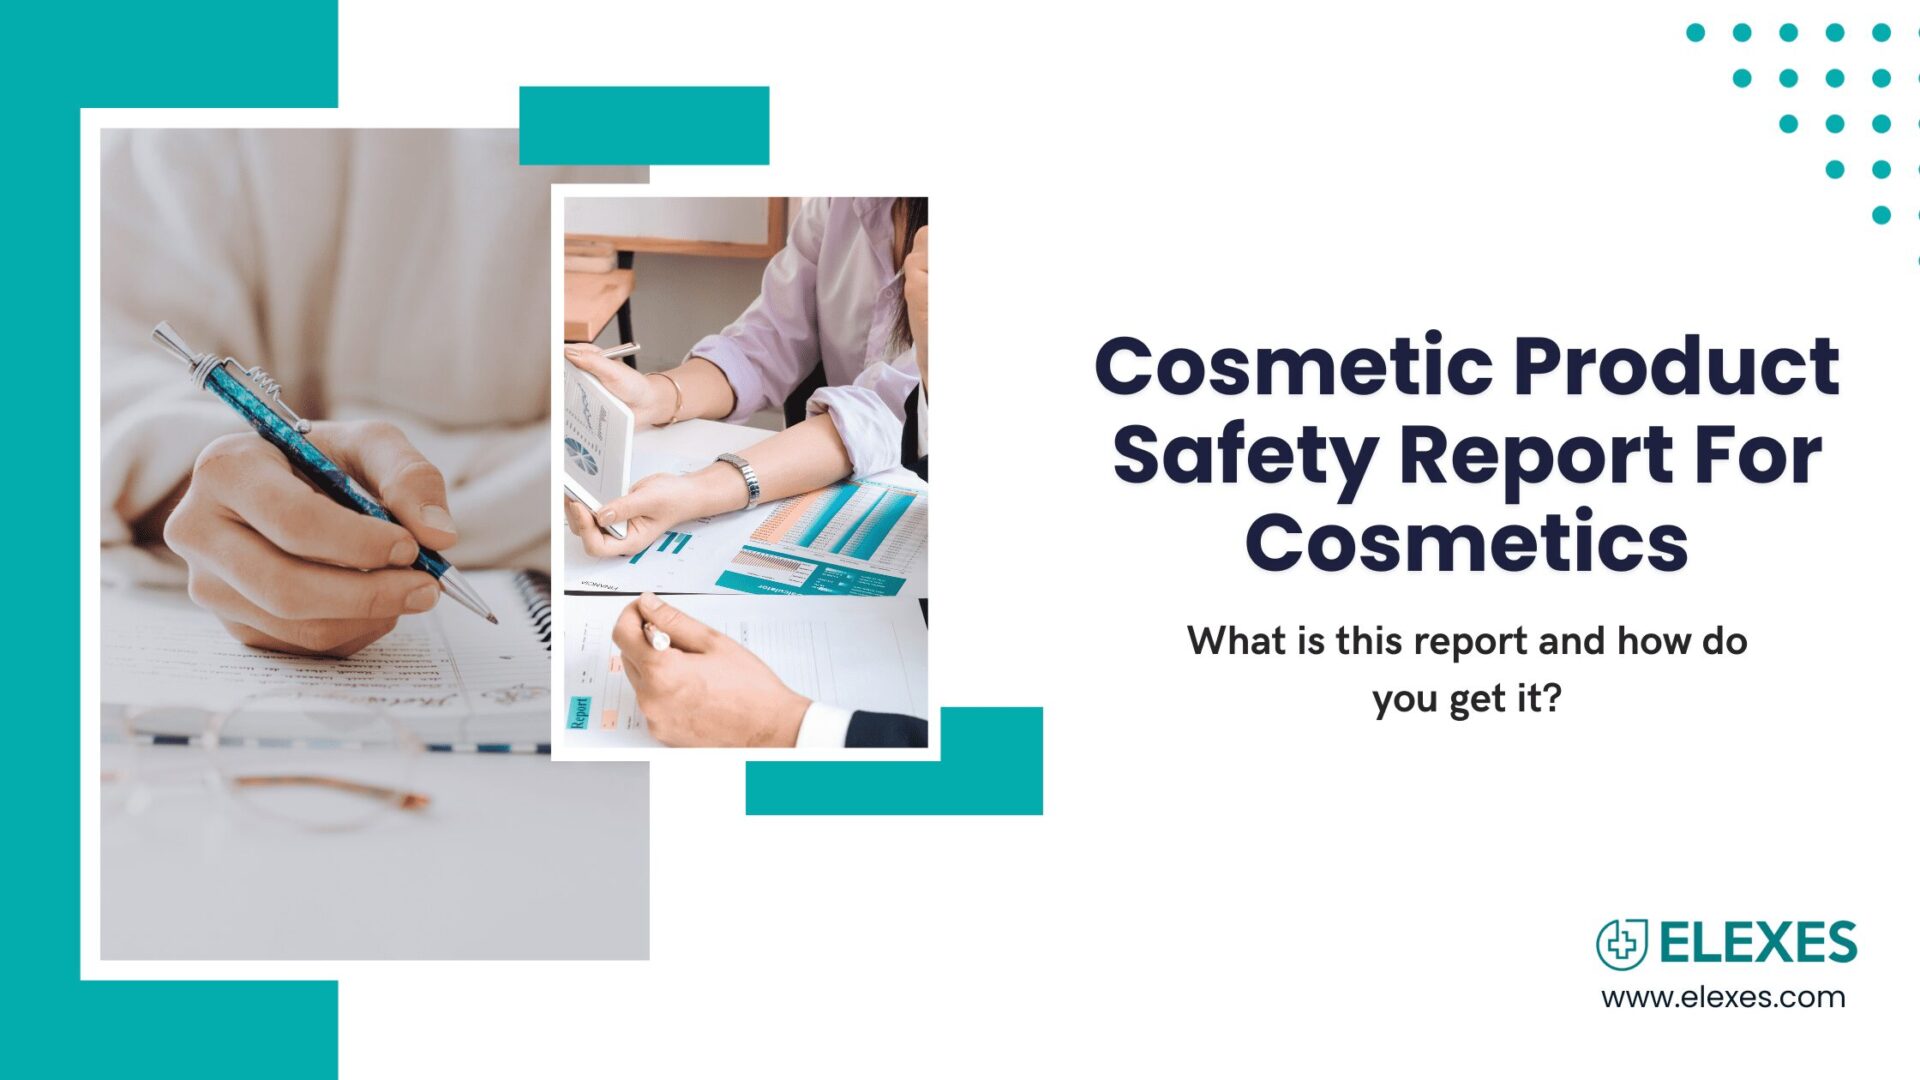 CPSR for cosmetics: what is this report and how do you get it?